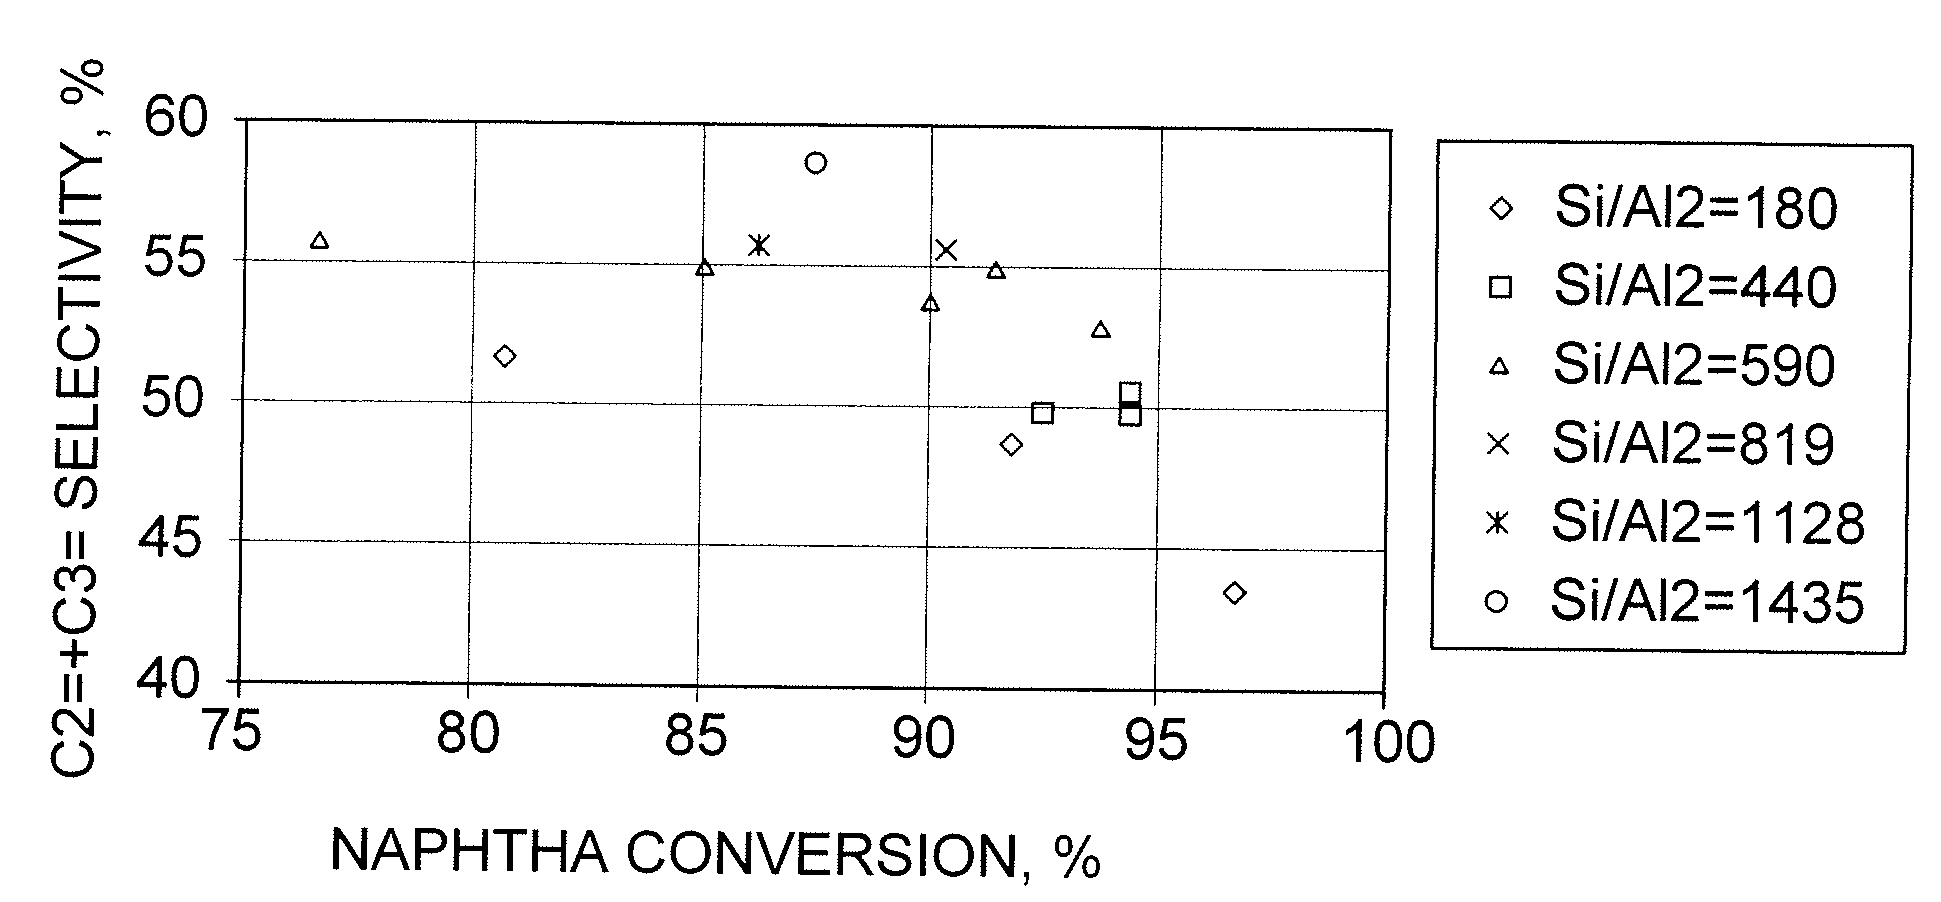 Mixture of Catalysts for Cracking Naphtha to Olefins